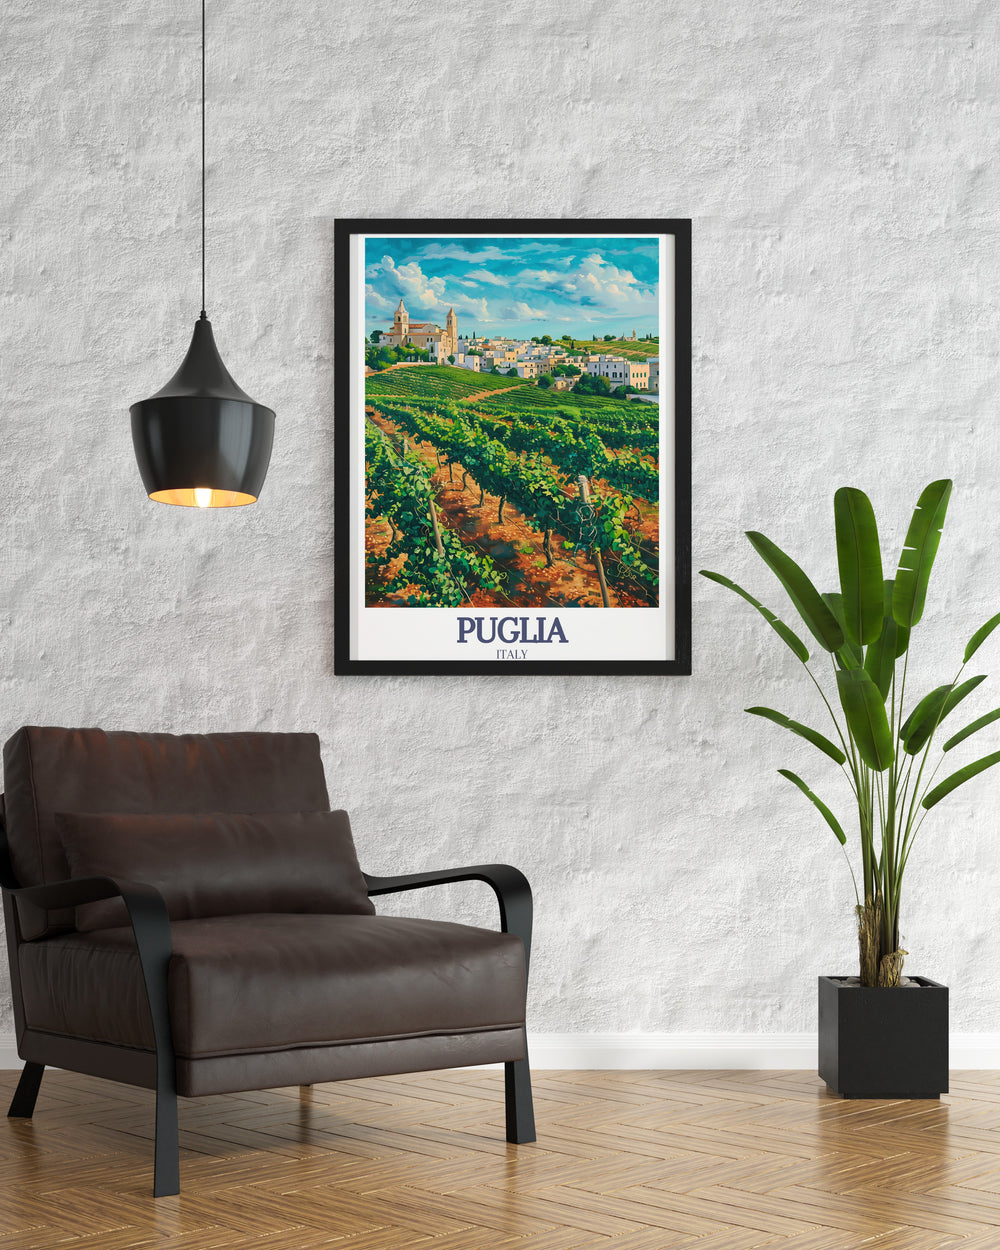 Explore Salento vineyards with this Italy Travel Print. The vibrant colors and intricate details of Salento vineyards make this Puglia Poster a must have for any Italian art lover. Perfect for adding a touch of sophistication to your home decor.